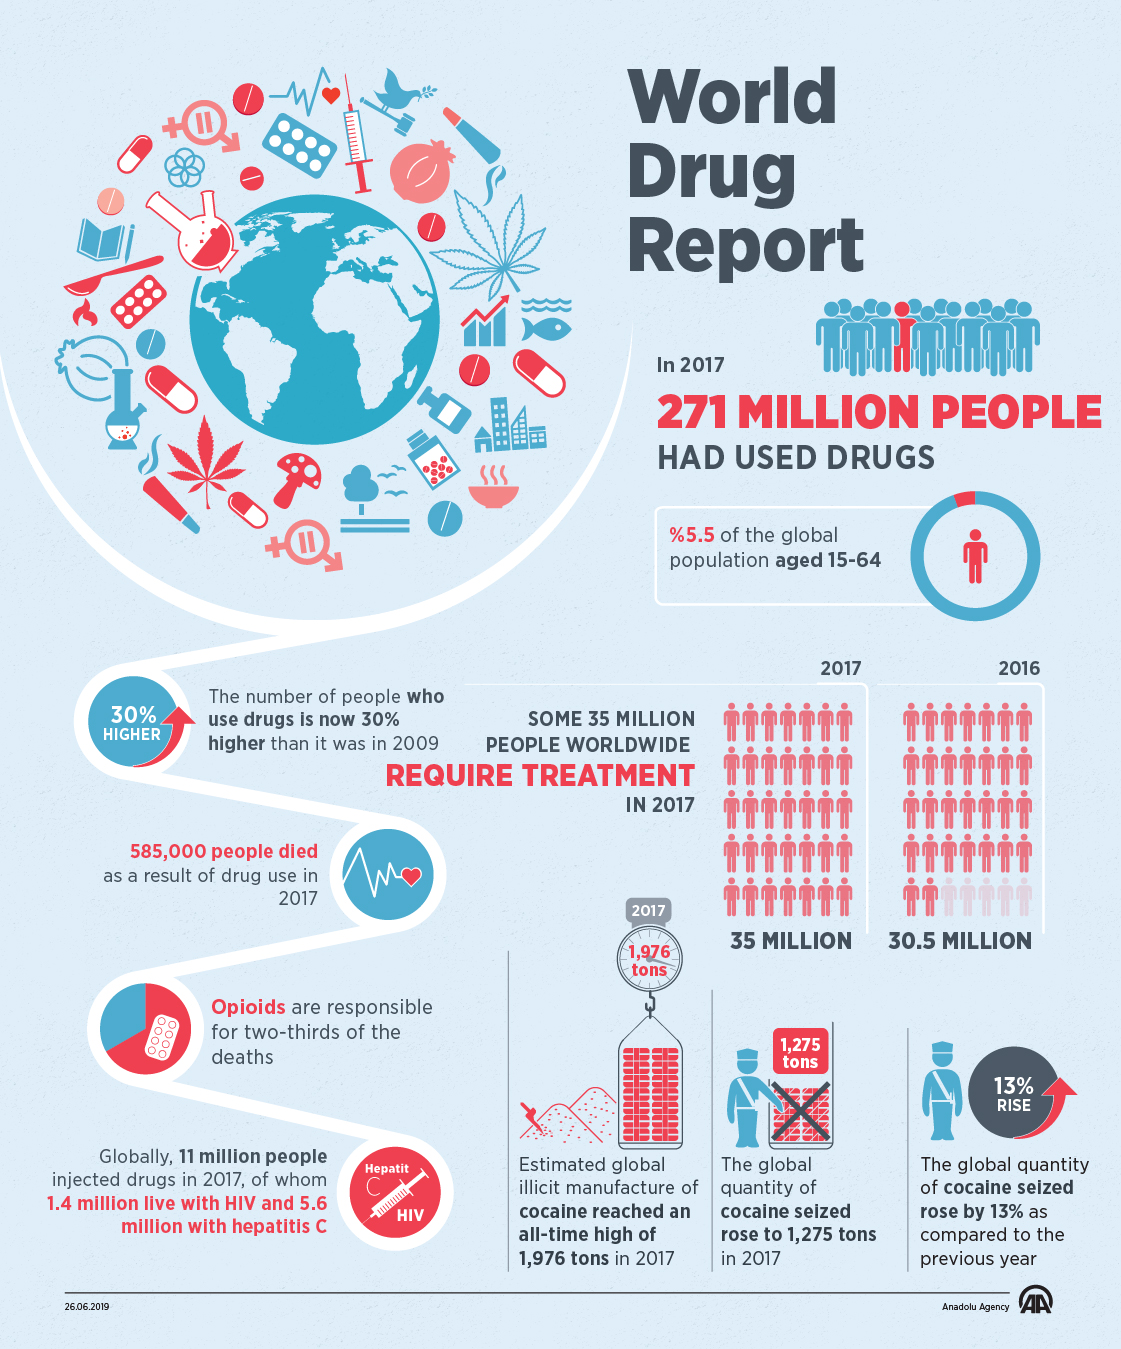 35M people worldwide suffer from drug use disorder: UN